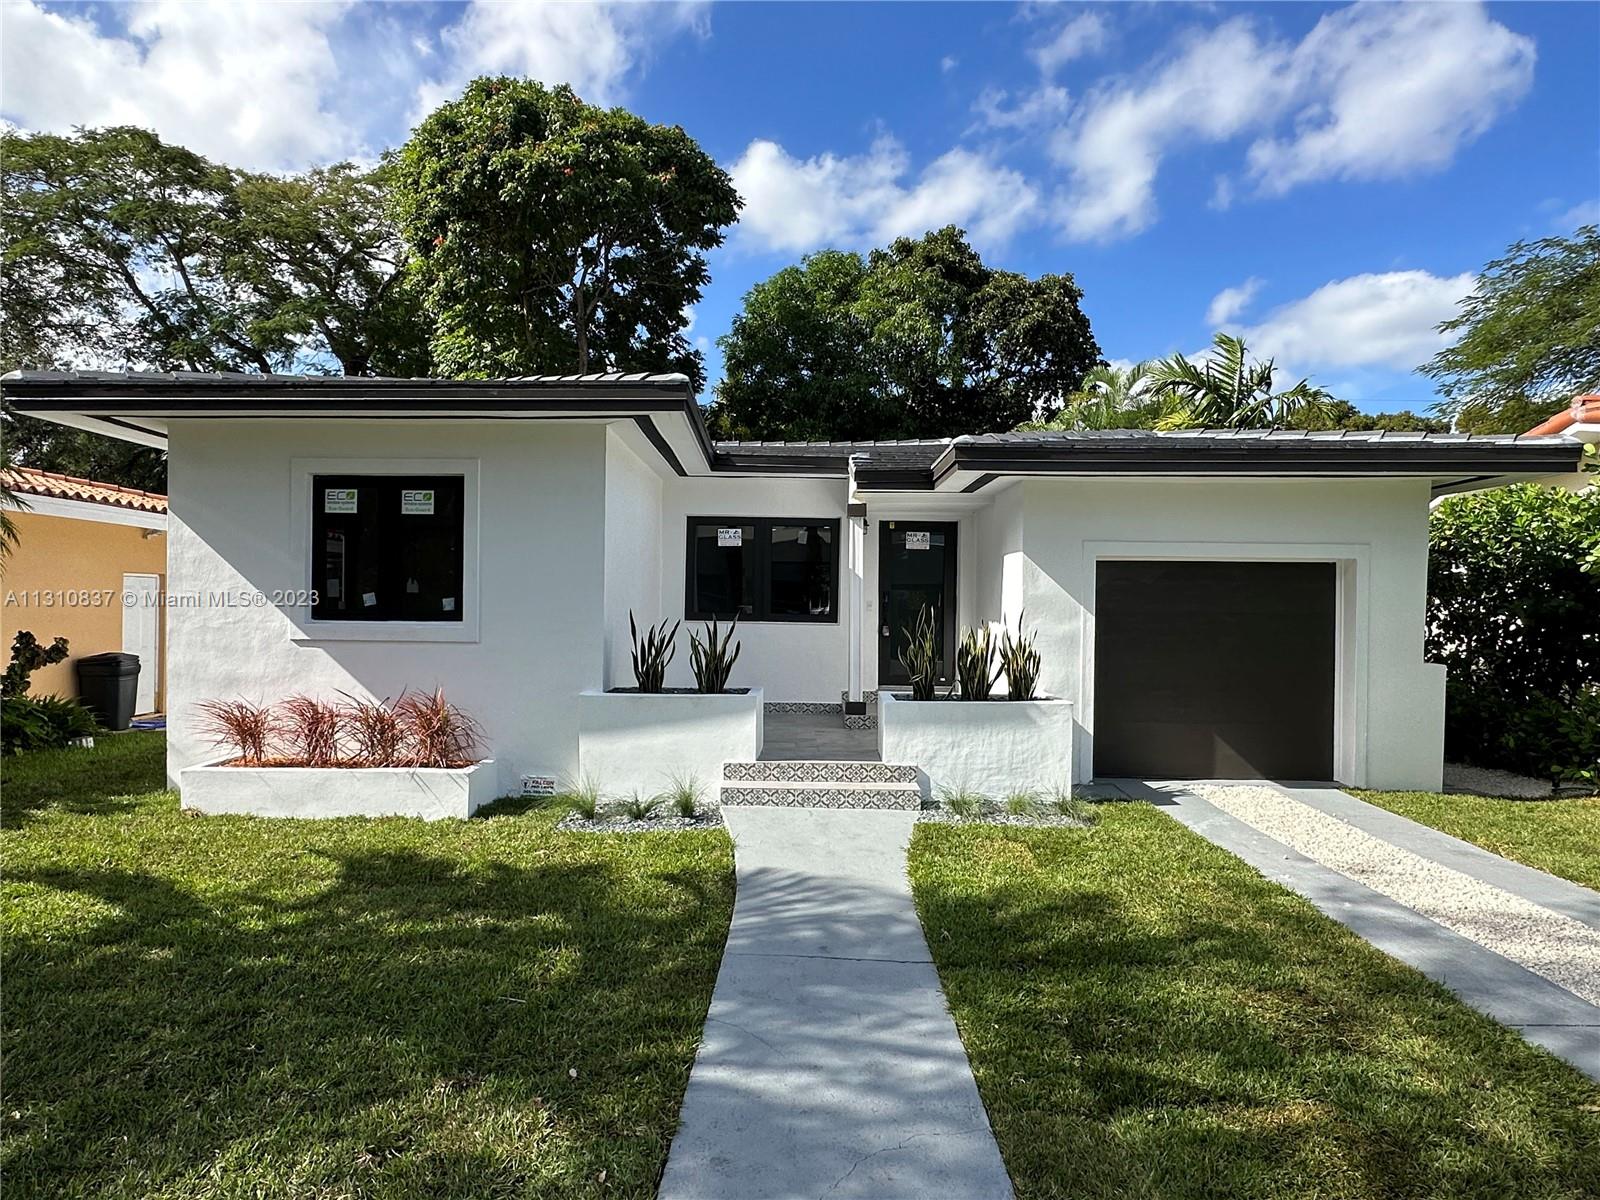 Coral Gables gem completely rehabbed with new roof, impact windows, new plumbing and electrical, new appliances, and new floors and kitchen. This is a turn key home in one of the most desired neighborhoods in the country located 2 blocks from Coral Gables Country Club and Golf.